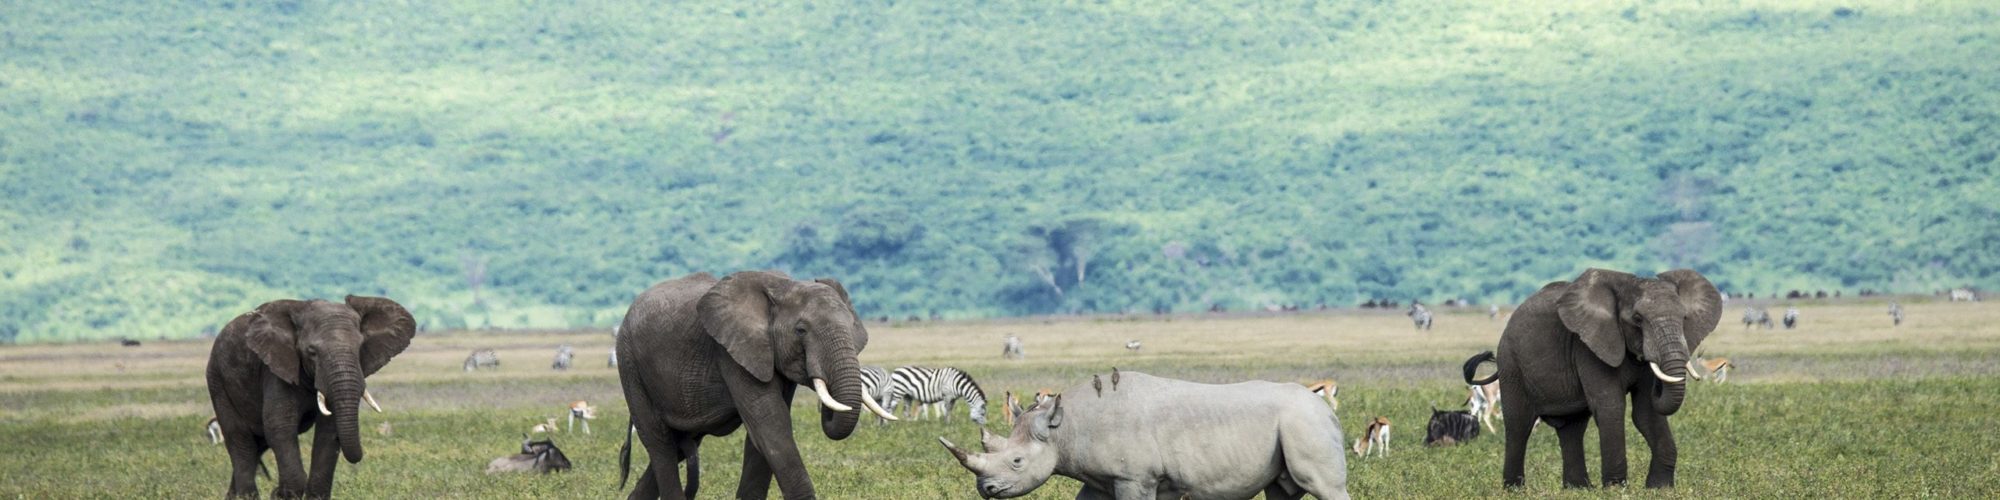 Ngorongoro travel agents packages deals